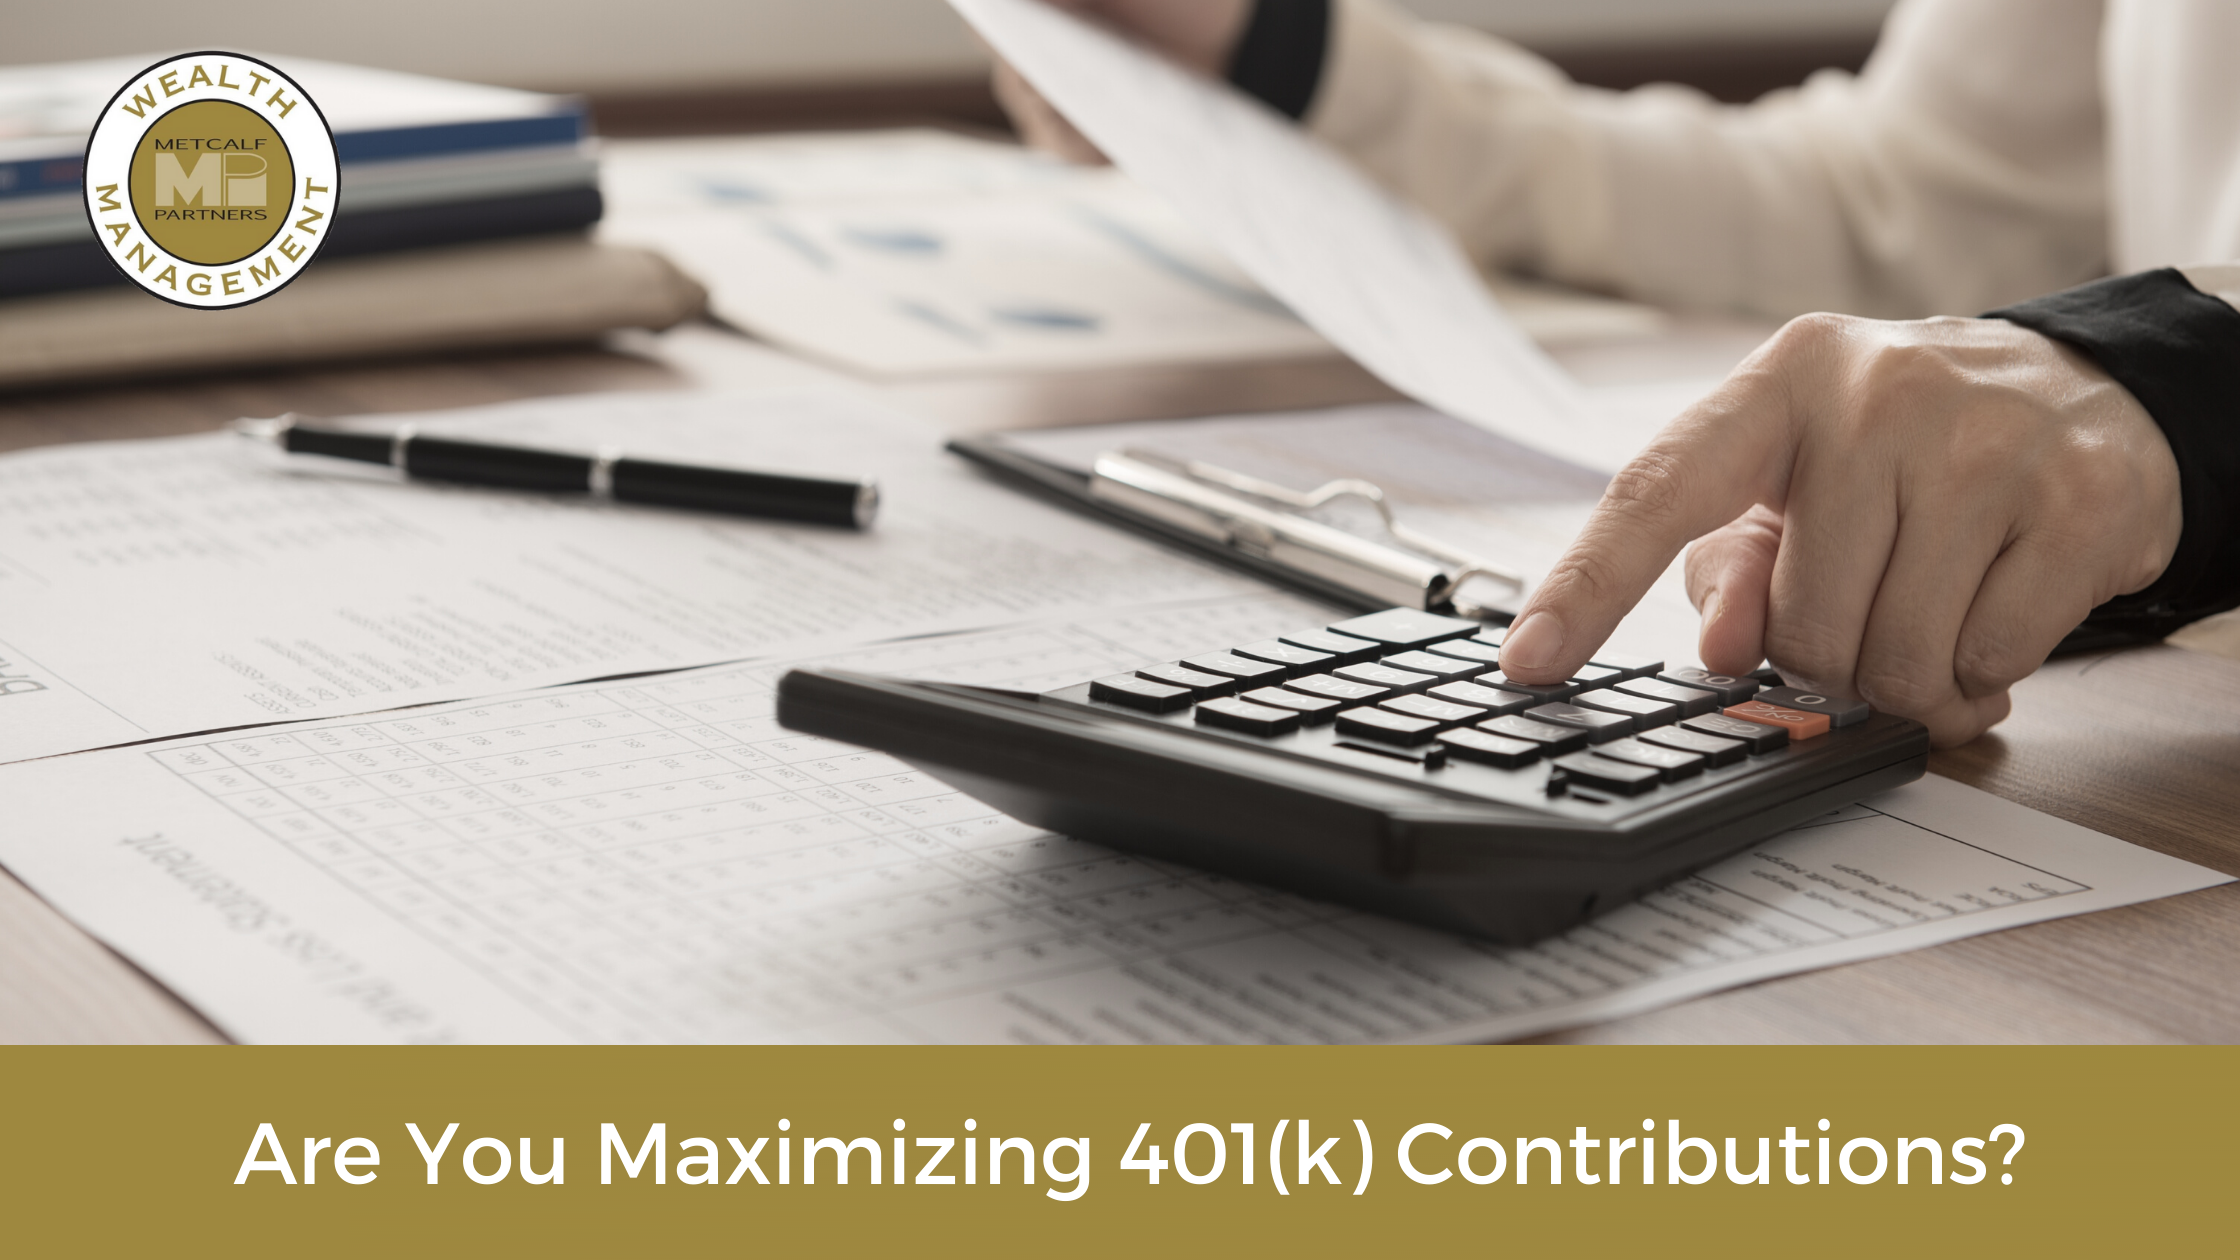 Featured image for “Are You Maximizing 401(k) Contributions?”